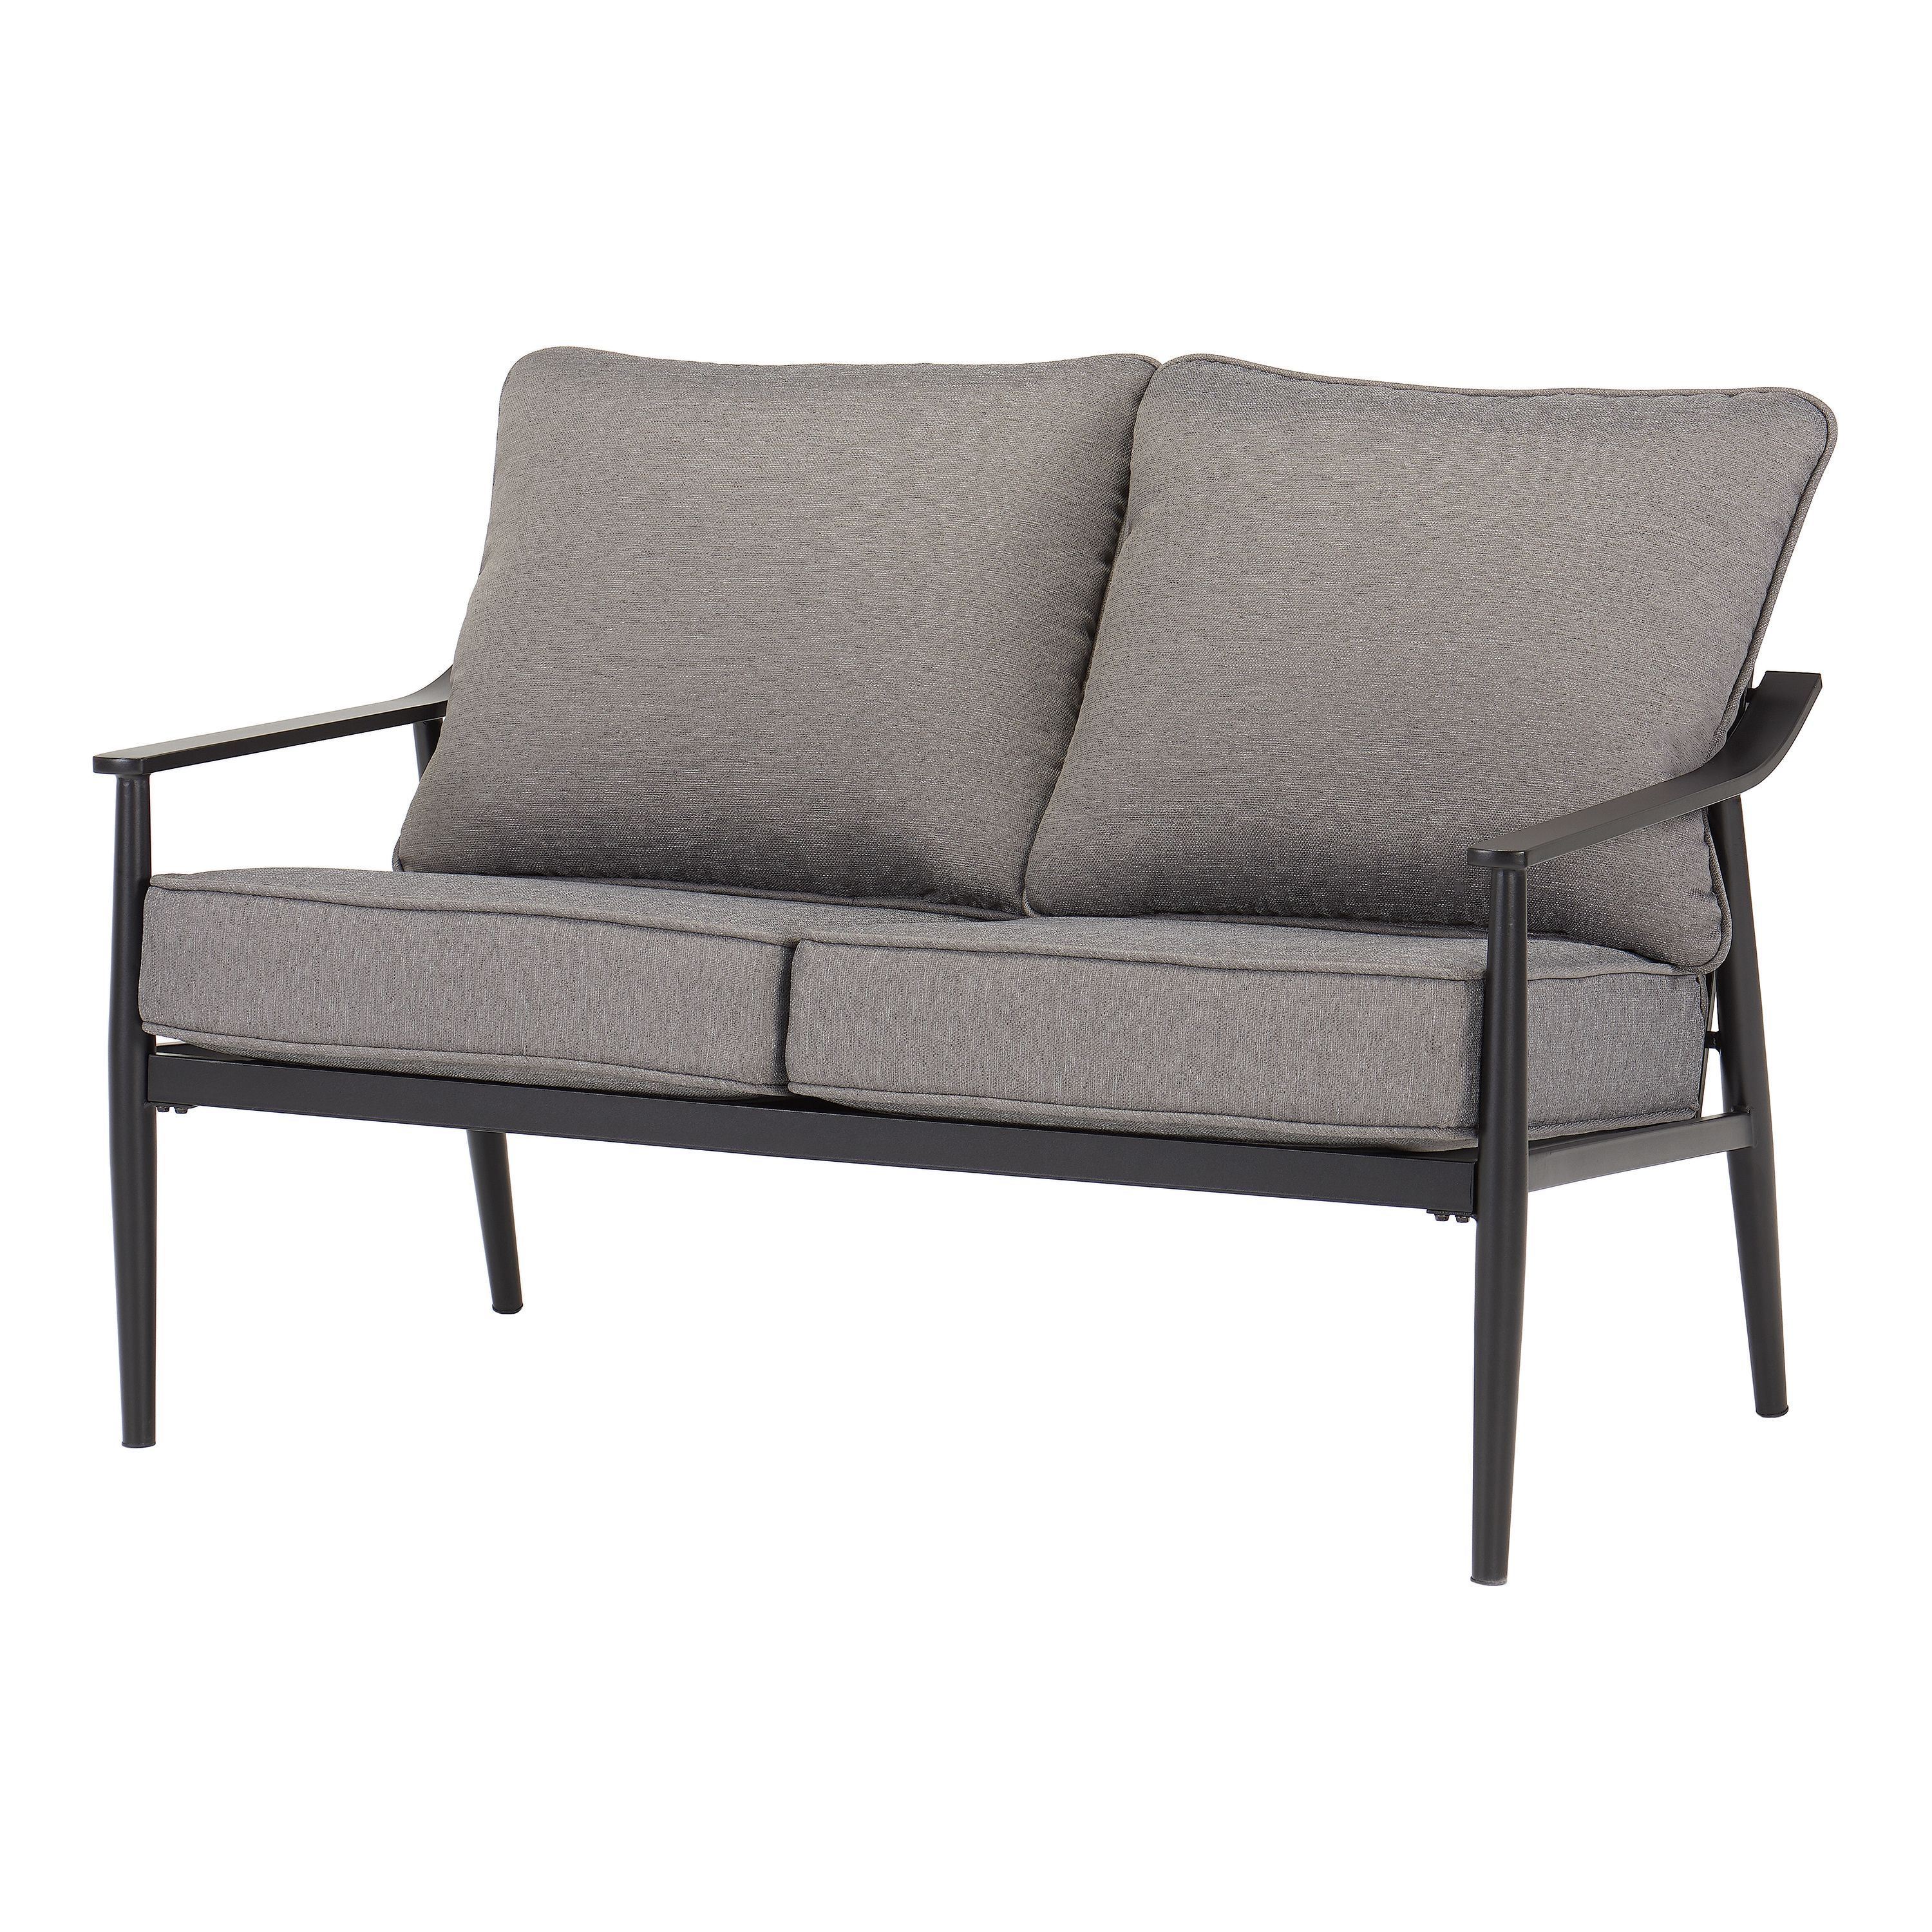 Better Homes & Gardens Acadia 2 Piece Patio Loveseat Set Pertaining To Favorite Calvin Patio Loveseats With Cushions (View 5 of 20)